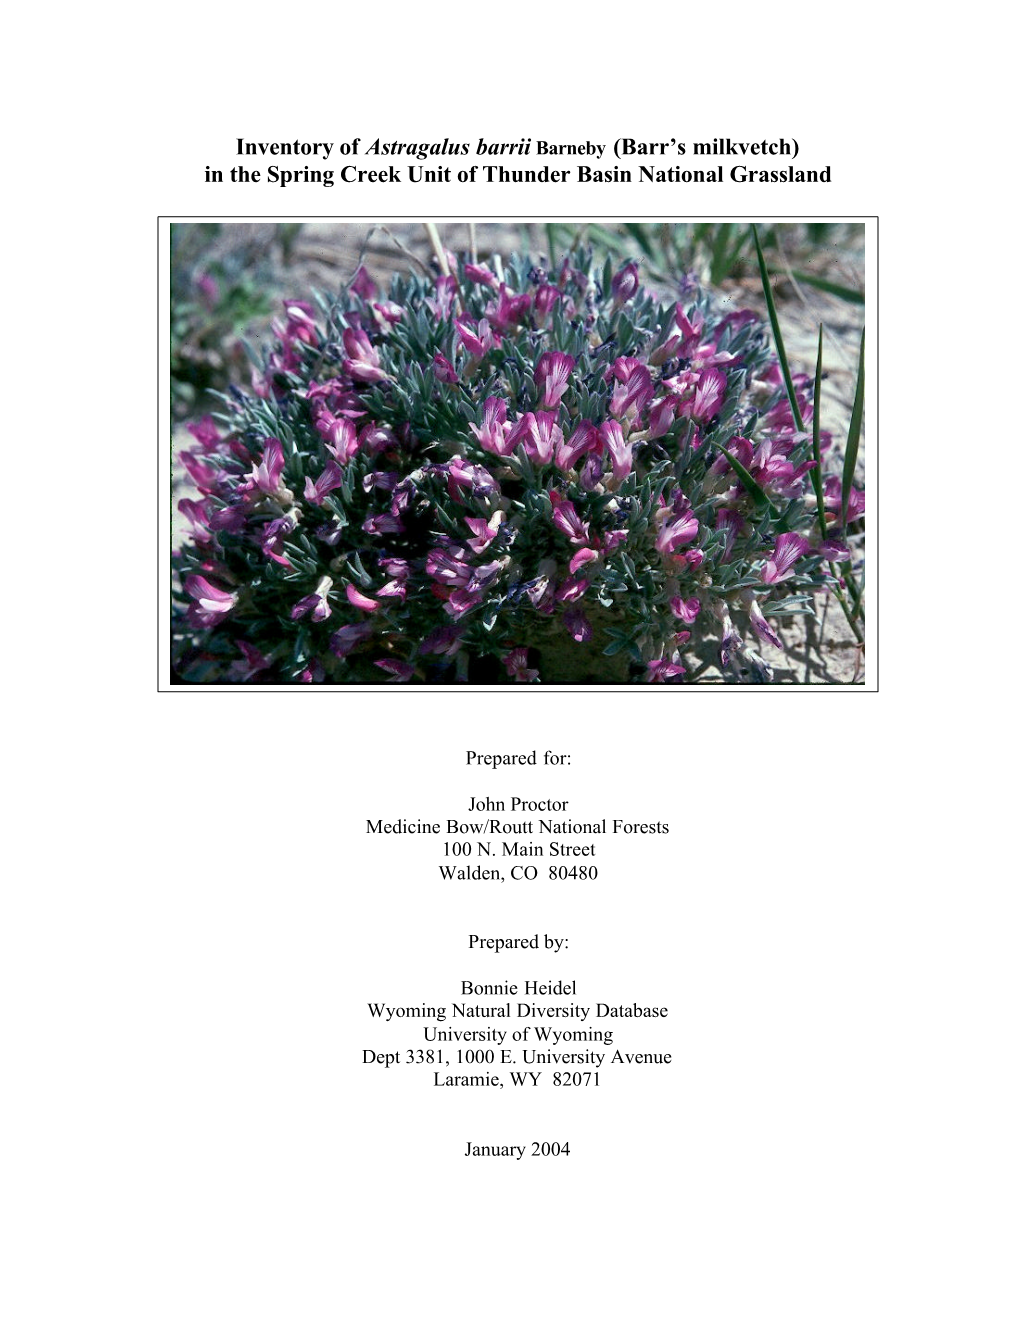 Inventory of Astragalus Barrii Barneby (Barr's Milkvetch) in the Spring